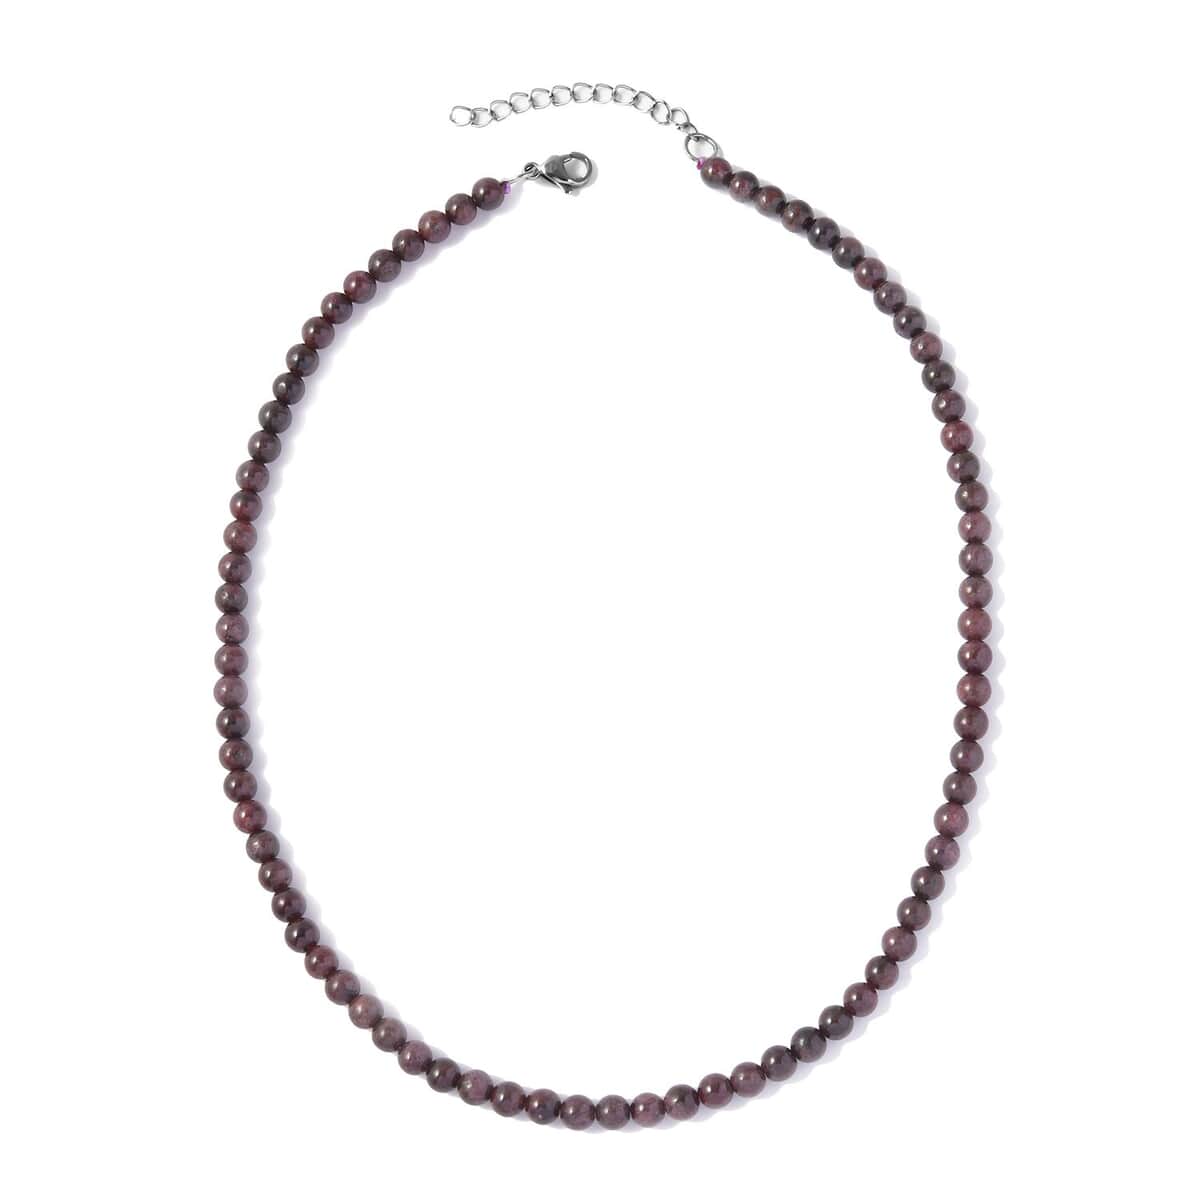 Mozambique Garnet 5-7mm Beaded Necklace (18-20 Inches) in Stainless Steel 165.00 ctw , Tarnish-Free, Waterproof, Sweat Proof Jewelry image number 0